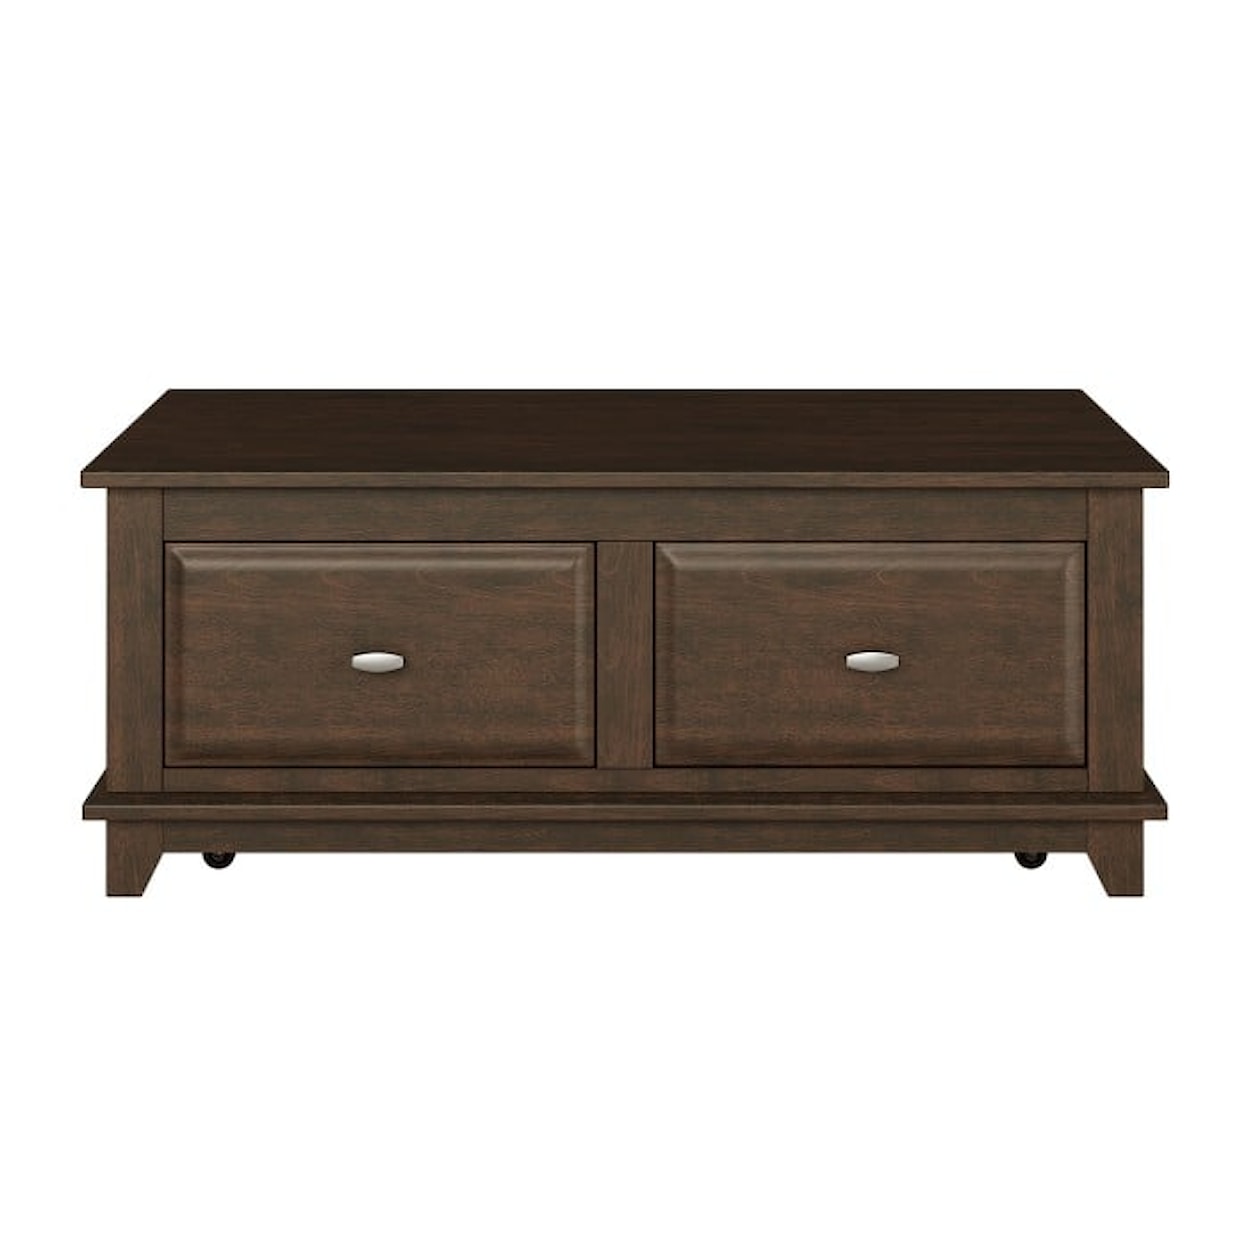 Homelegance Minot Lift Top Cocktail Table